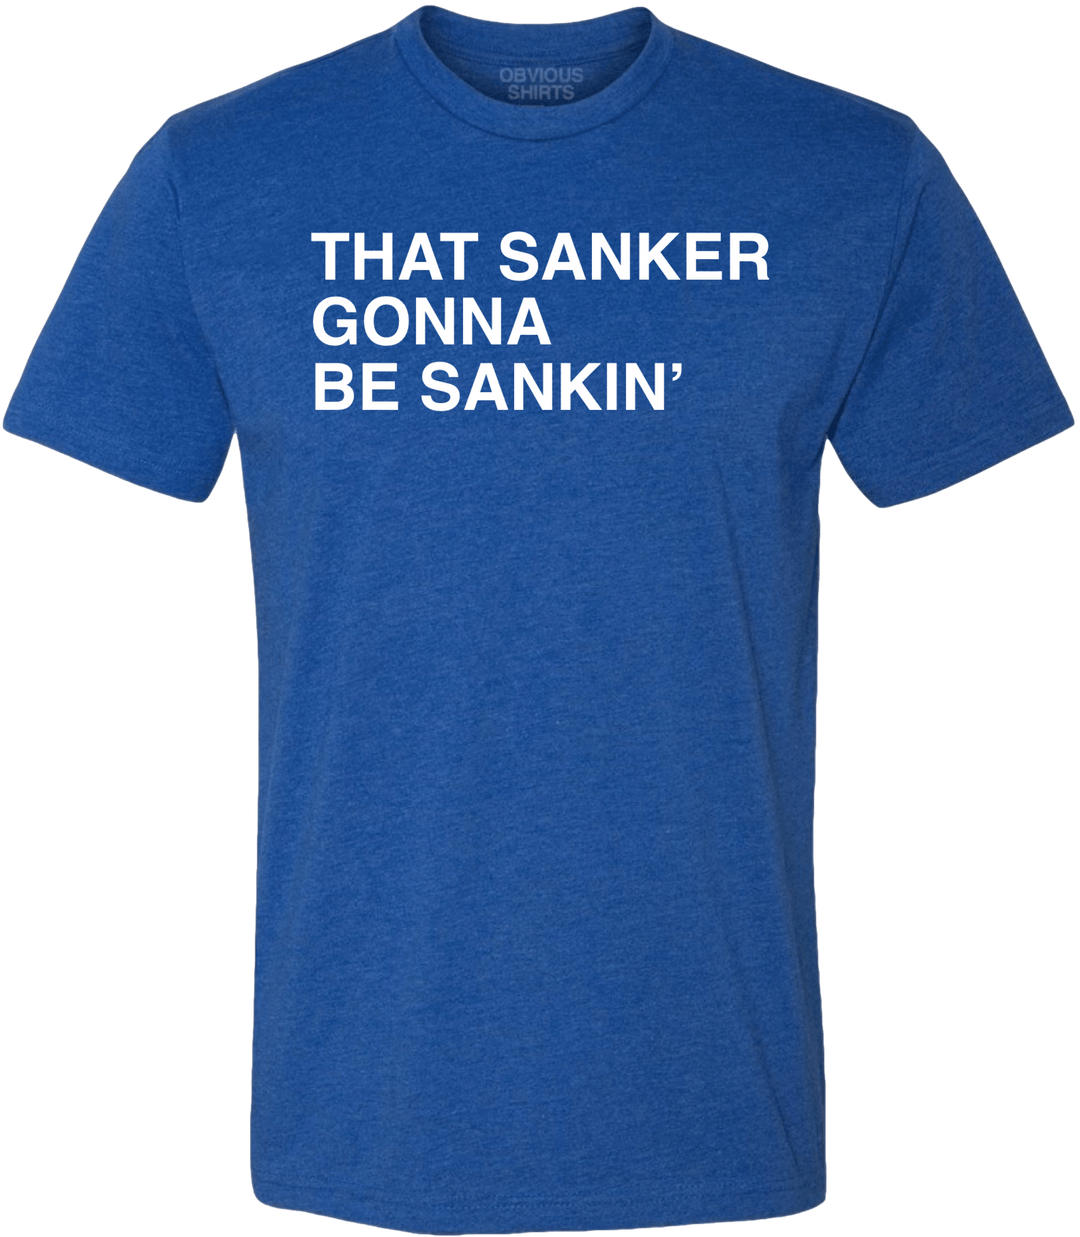 THAT SANKER GONNA BE SANKIN' - OBVIOUS SHIRTS